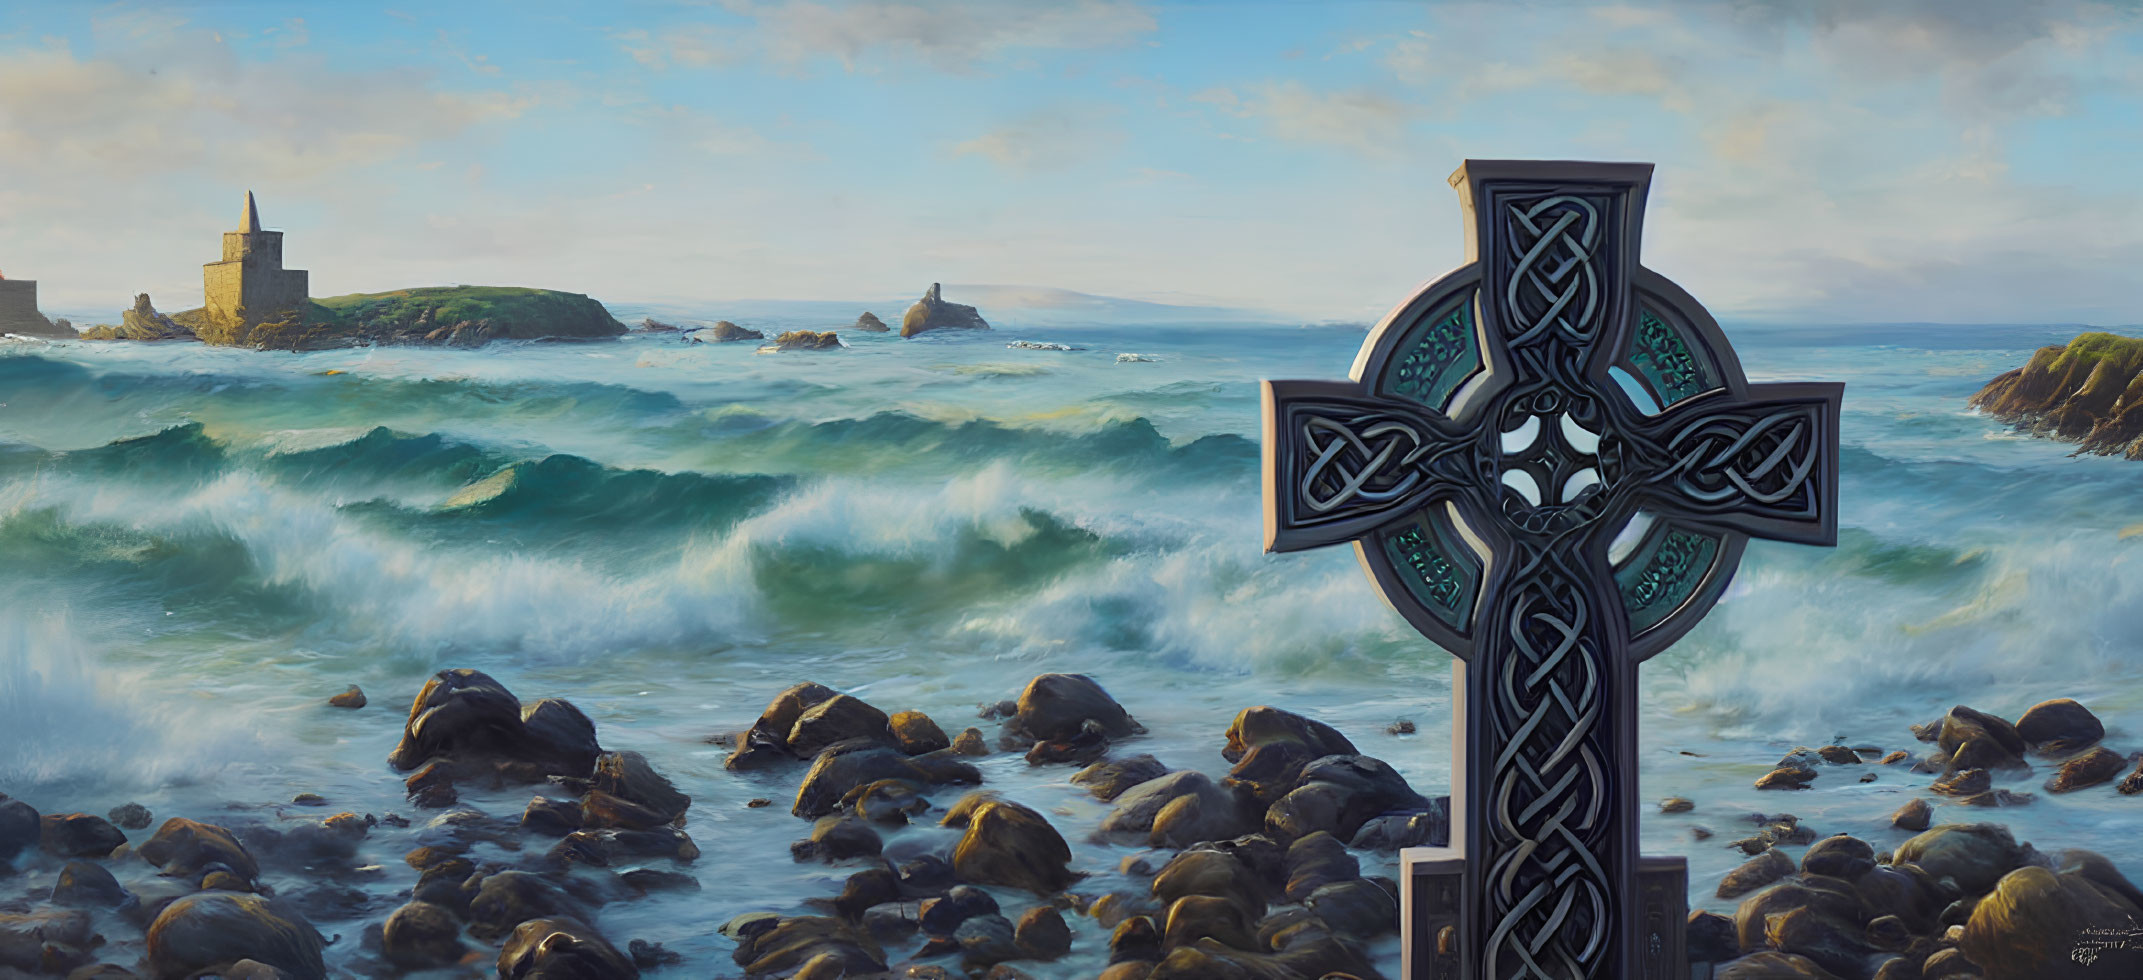 Tranquil Celtic cross overlooking rocky shores and ancient ruins in serene seascape